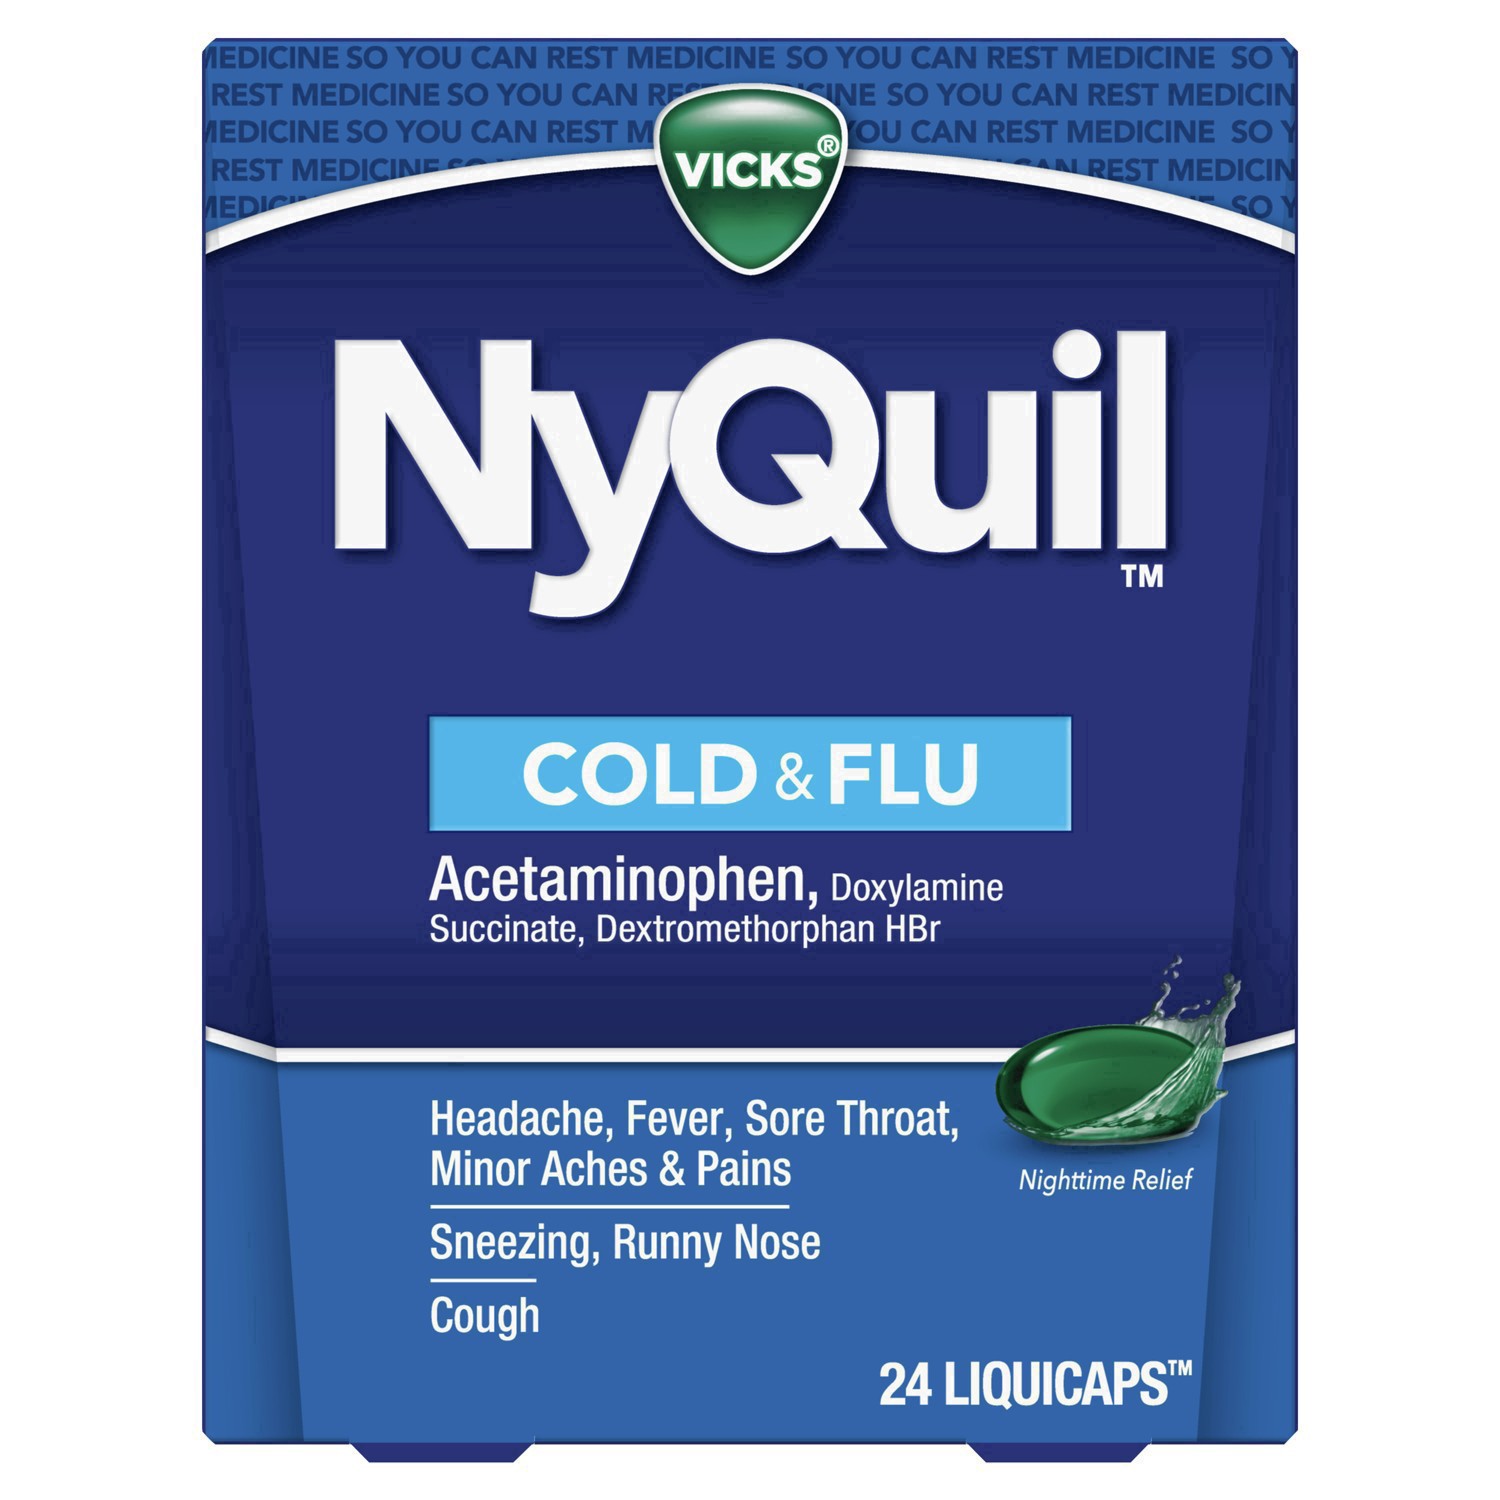 slide 22 of 68, NyQuil Vicks NyQuil Cold & Flu Medicine LiquiCaps - 24ct, 24 ct